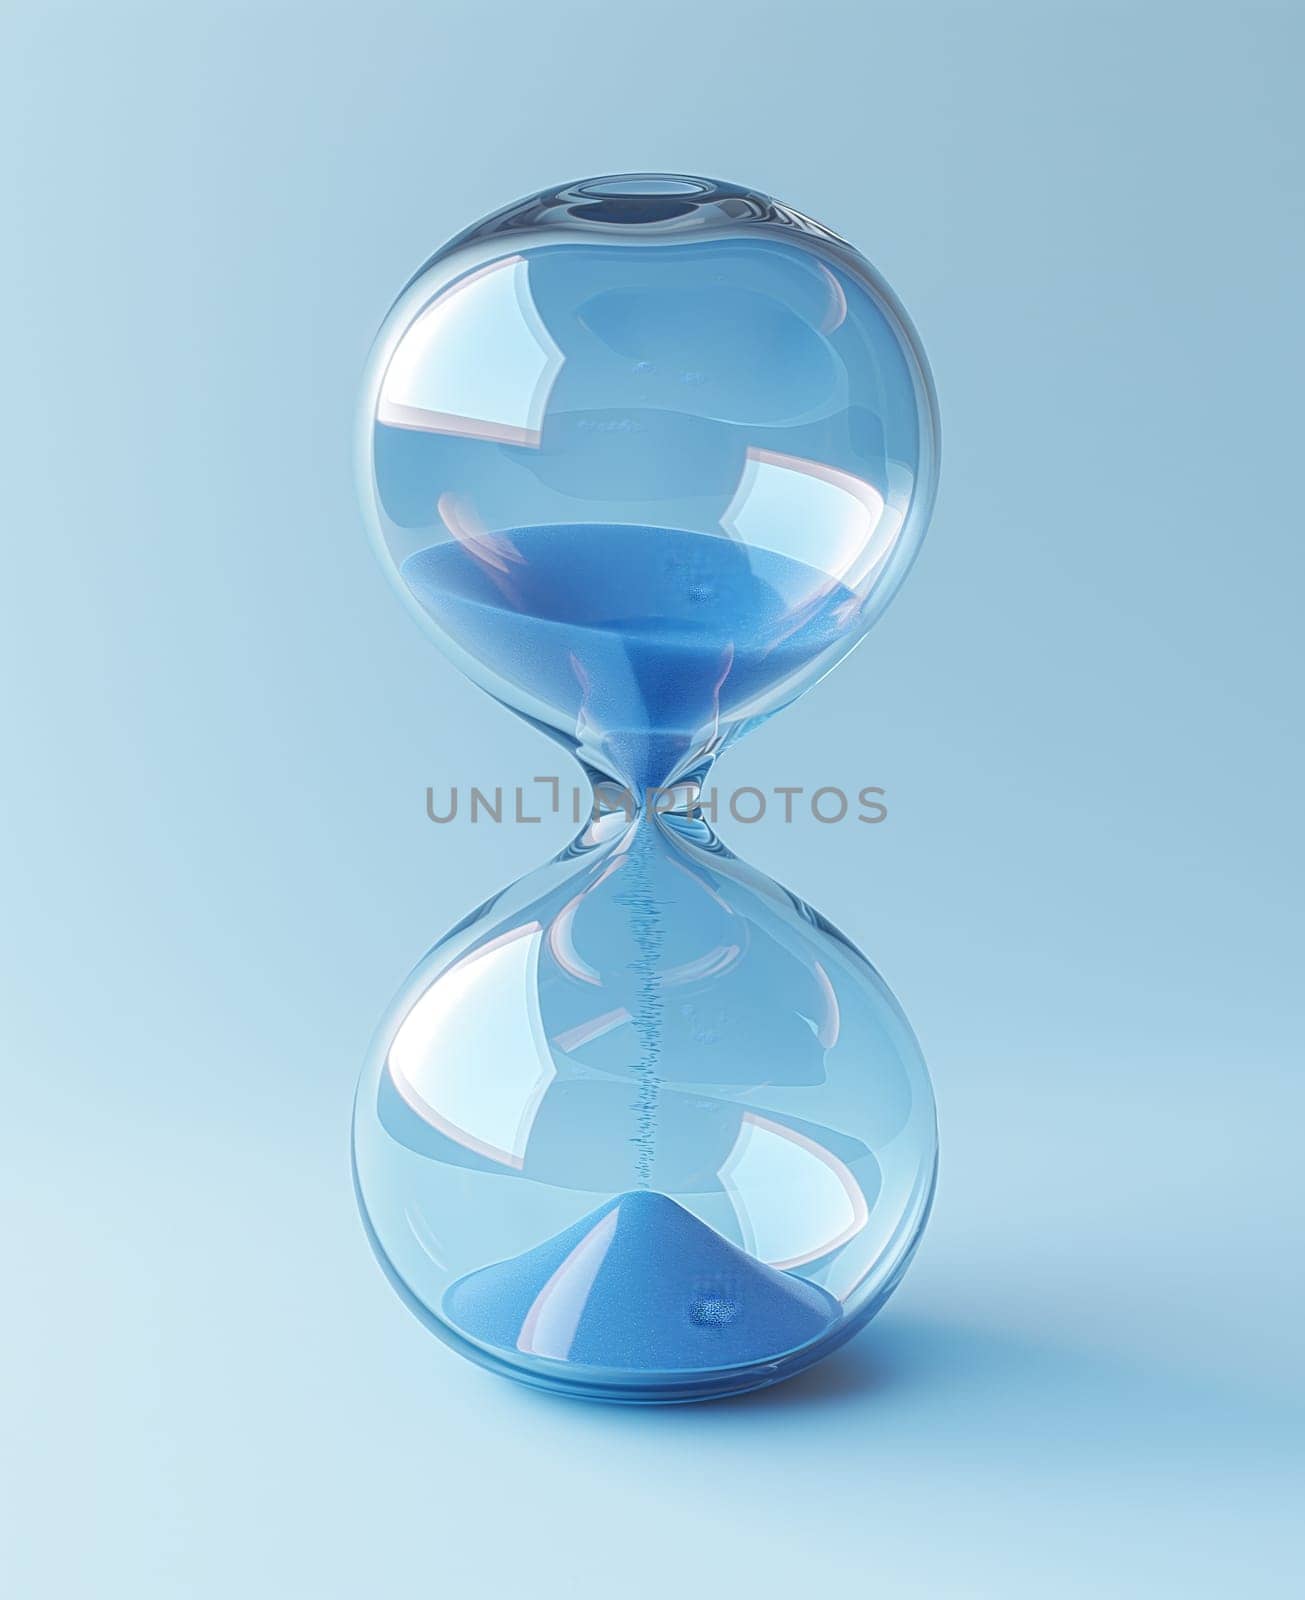 Hourglass showing time on a blue background. by Fischeron